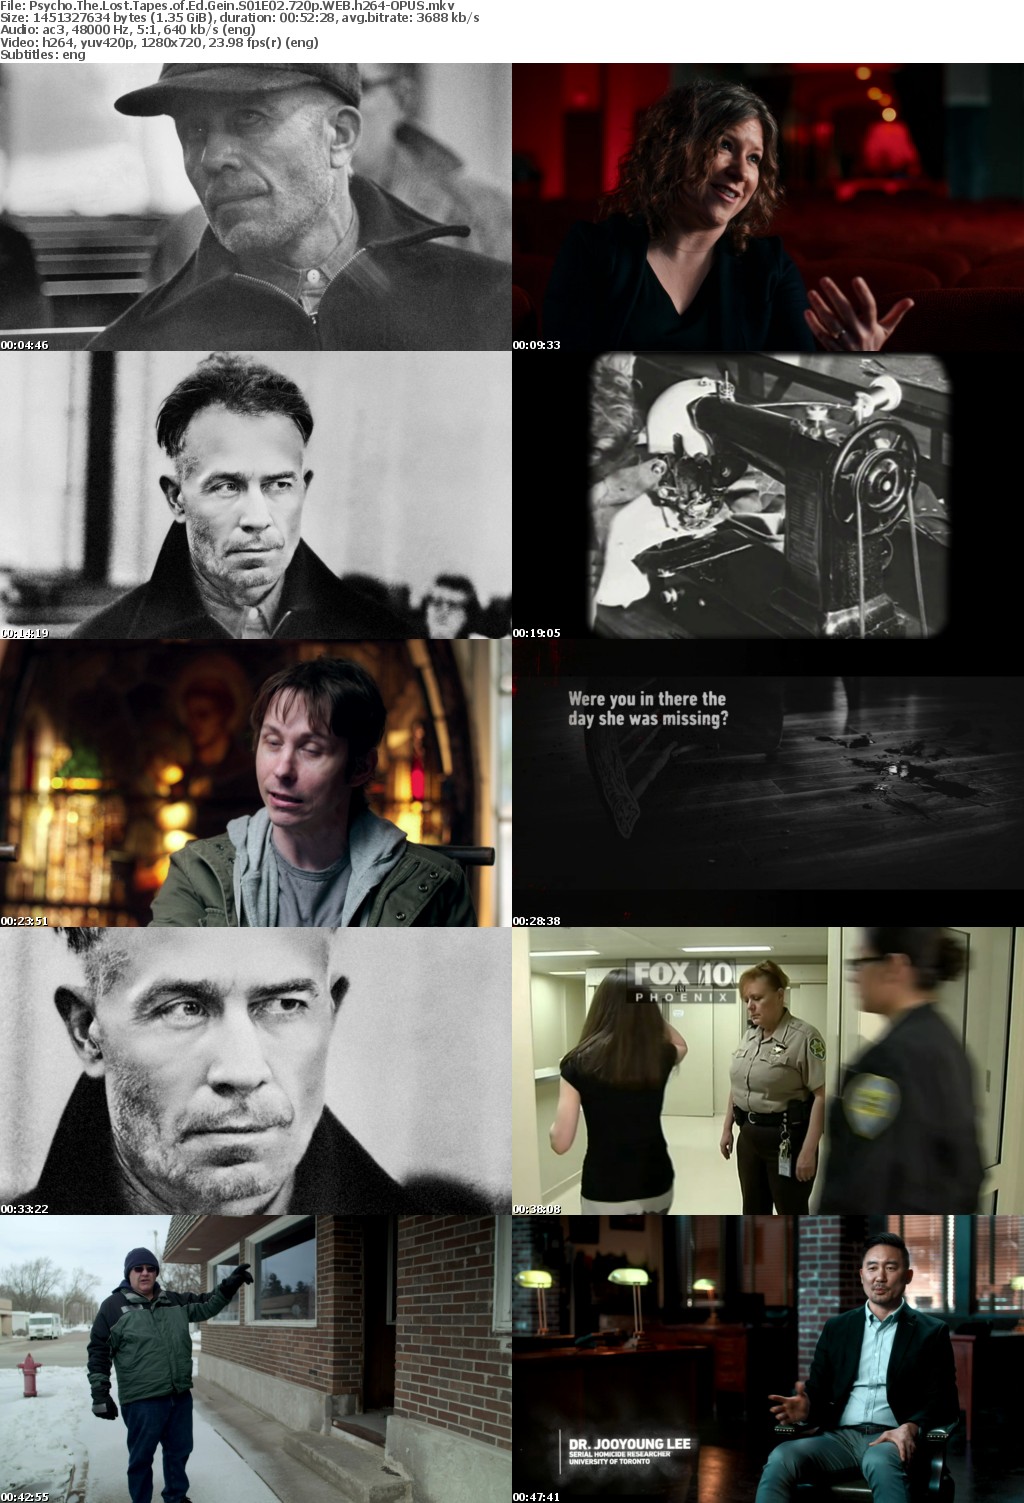 Psycho The Lost Tapes of Ed Gein S01E02 720p WEB h264-OPUS